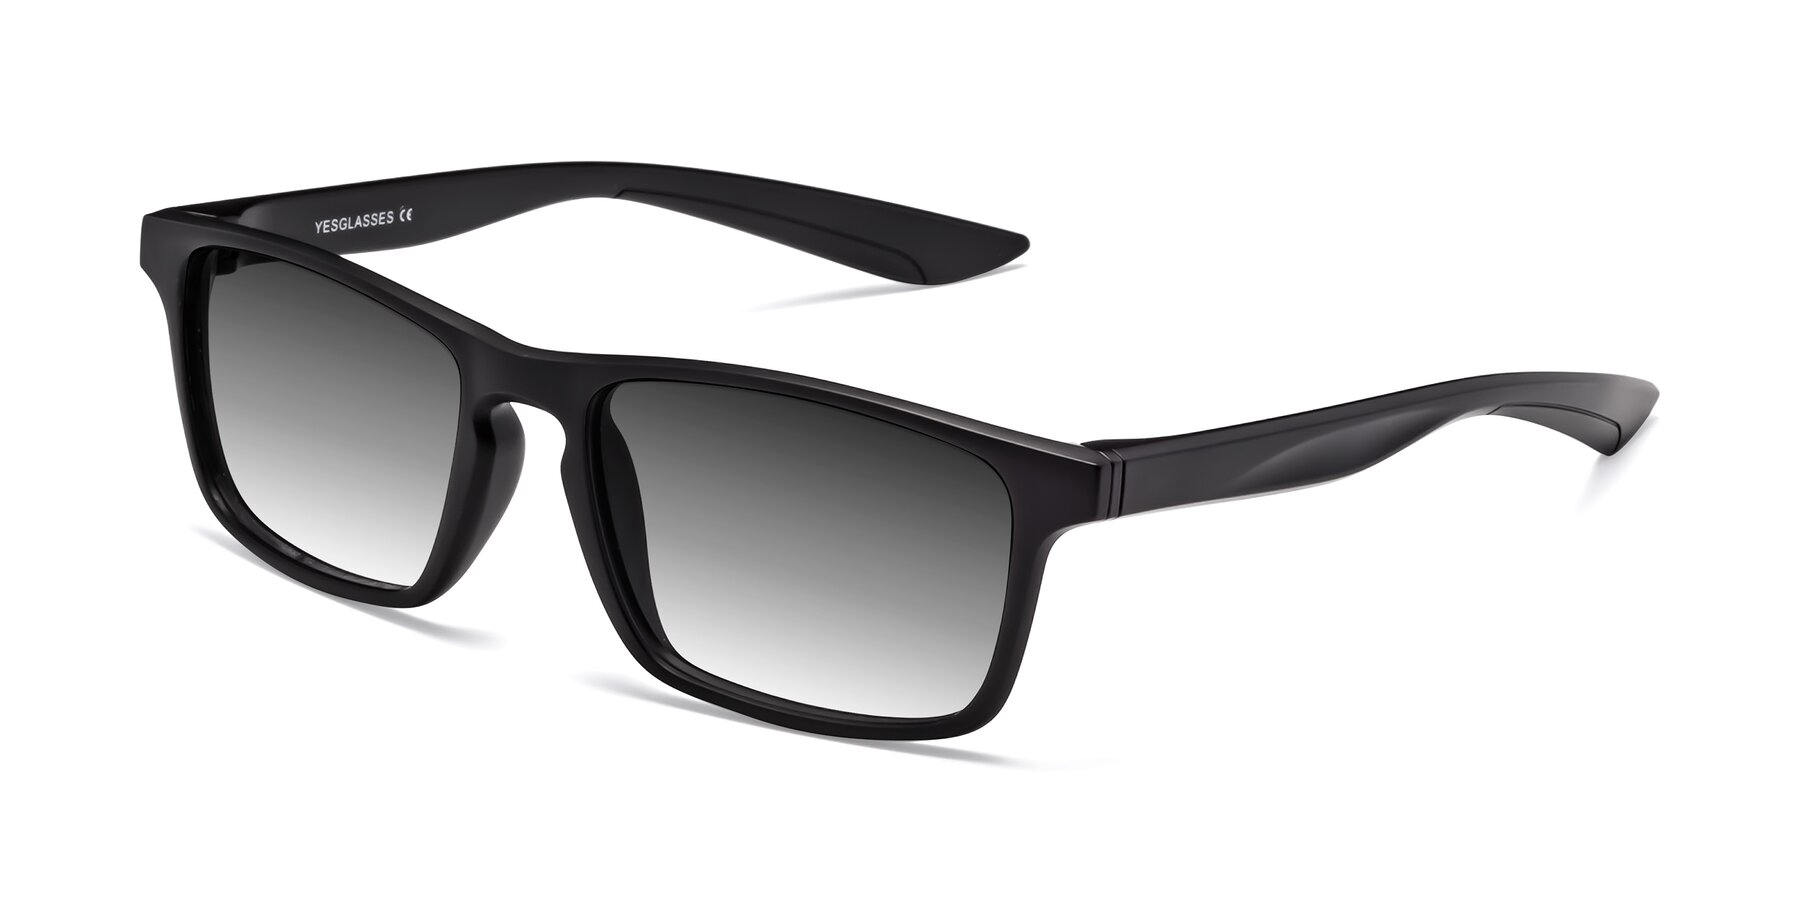 Angle of Passion in Matte Black with Gray Gradient Lenses